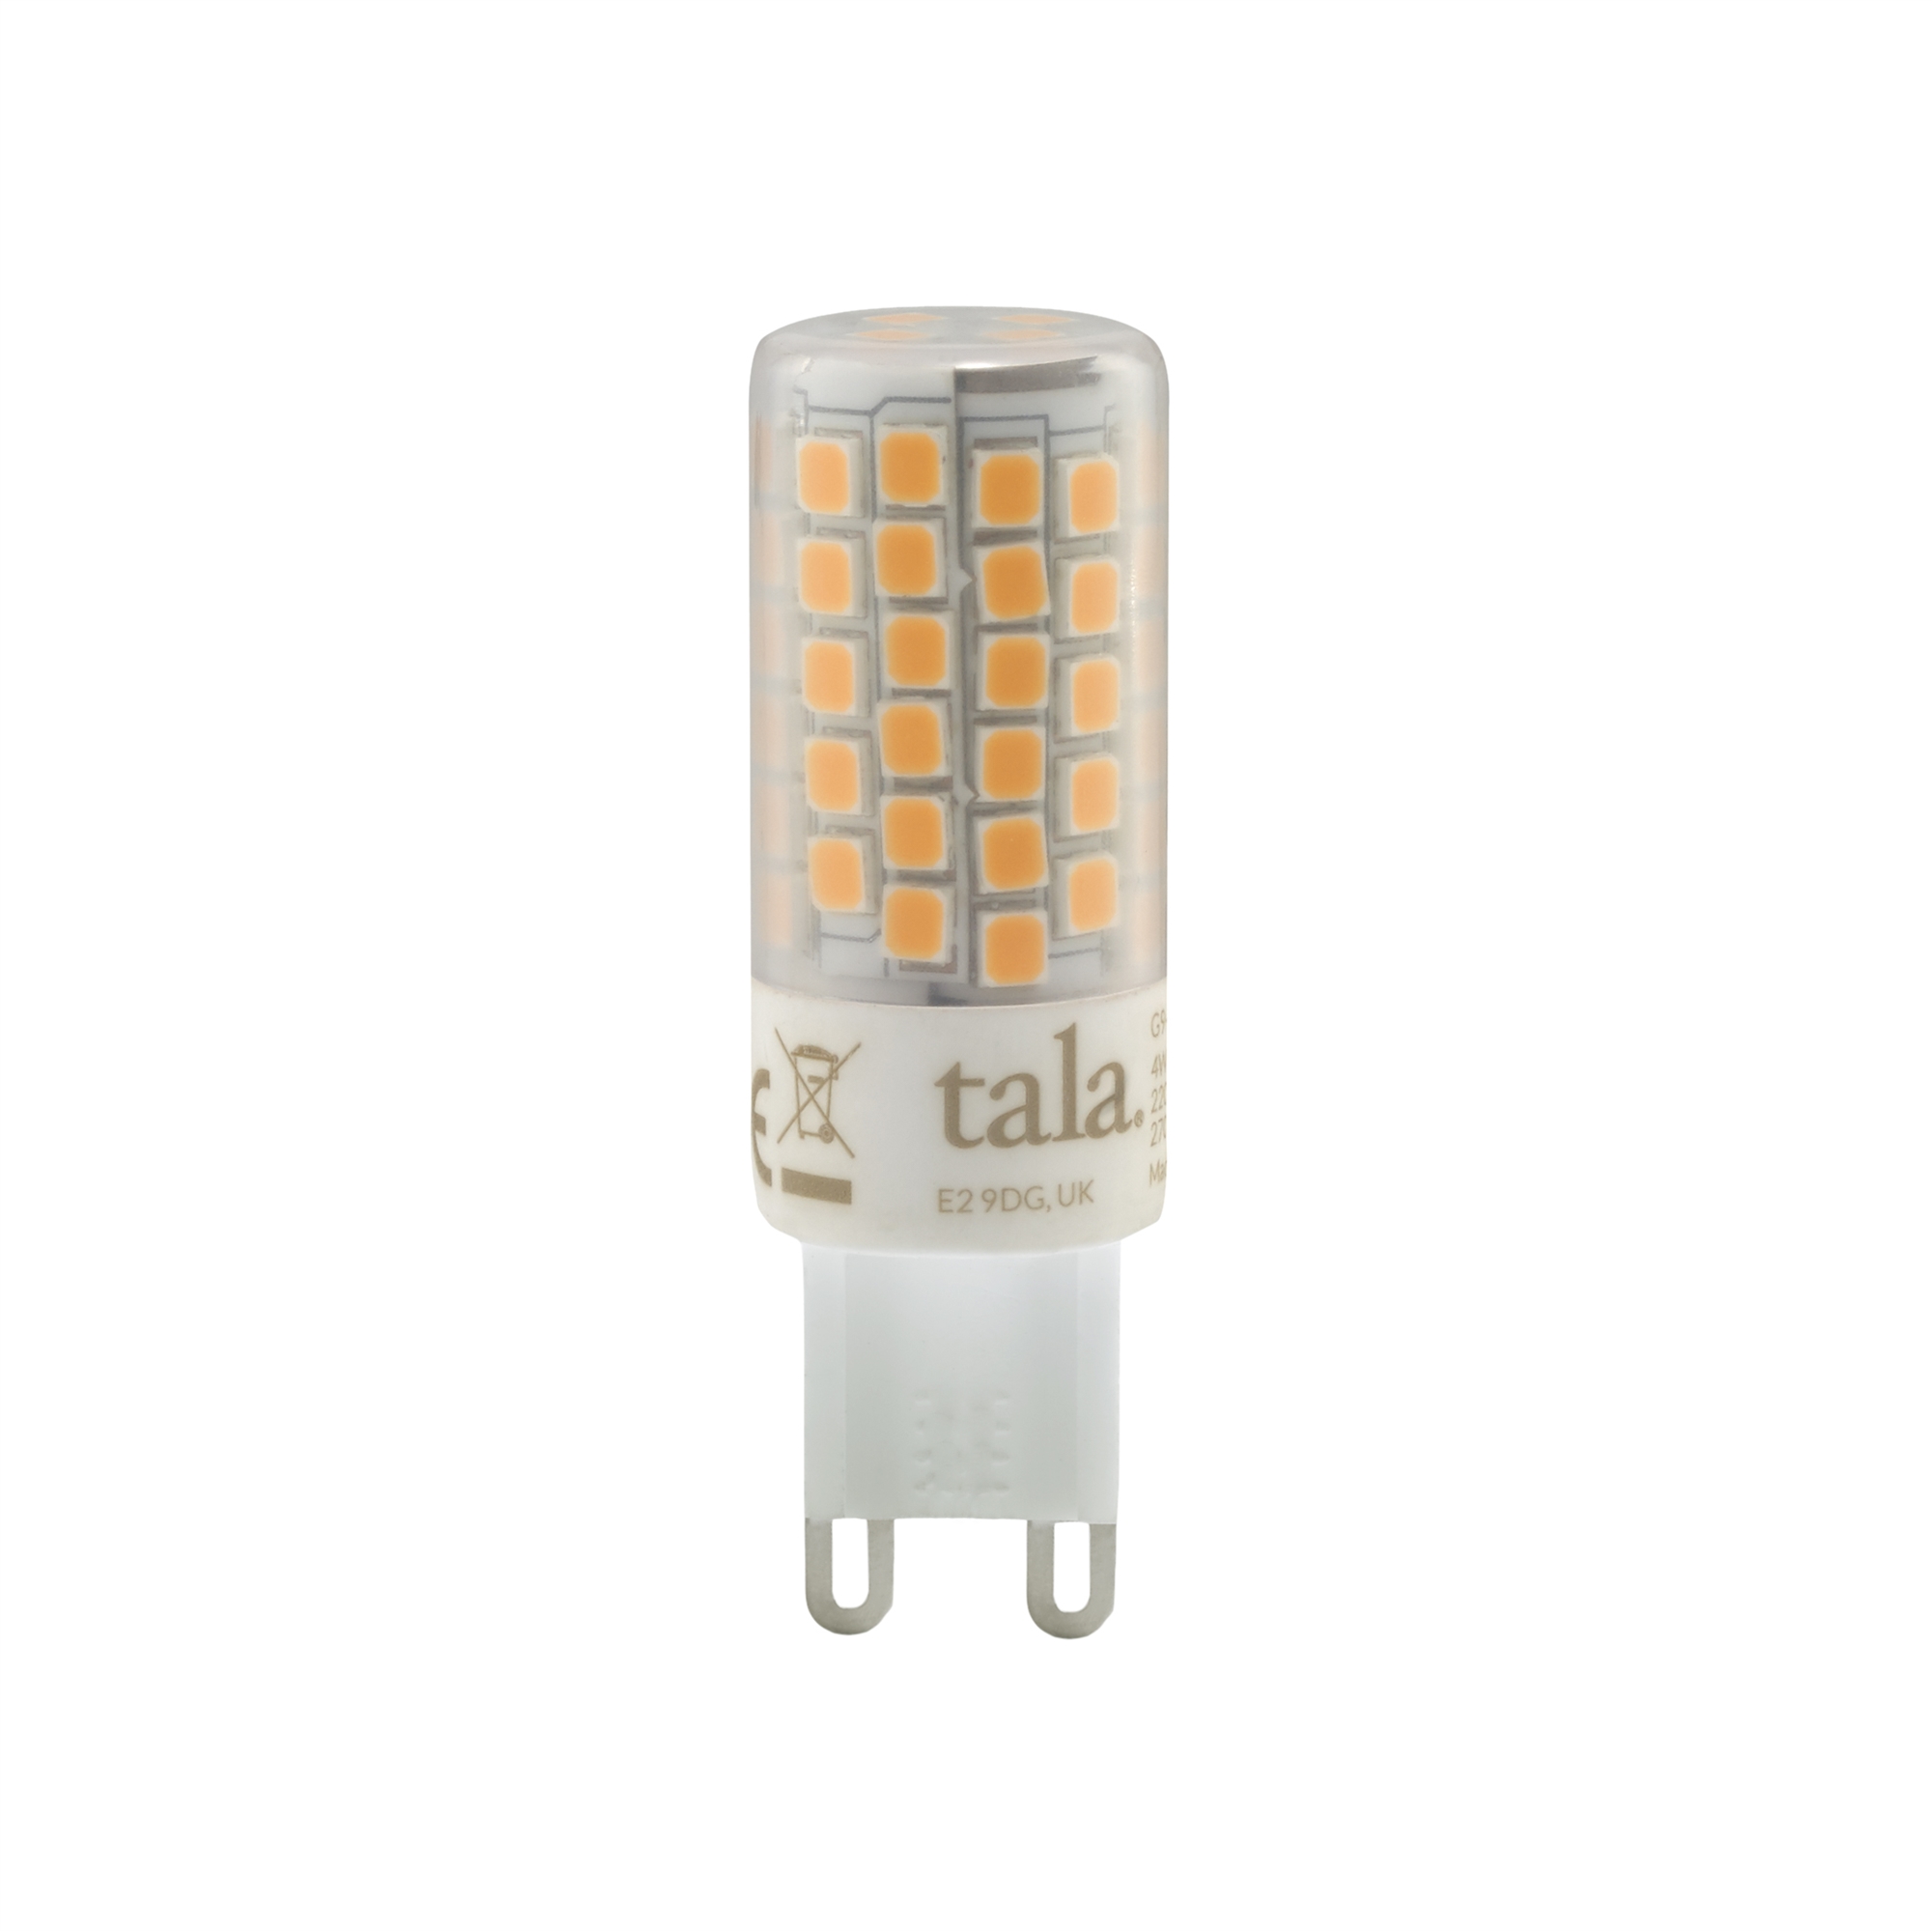 Tala 3.6W LED Lamp 2700K CRI 97 230V Dimmable Frosted Cover CE